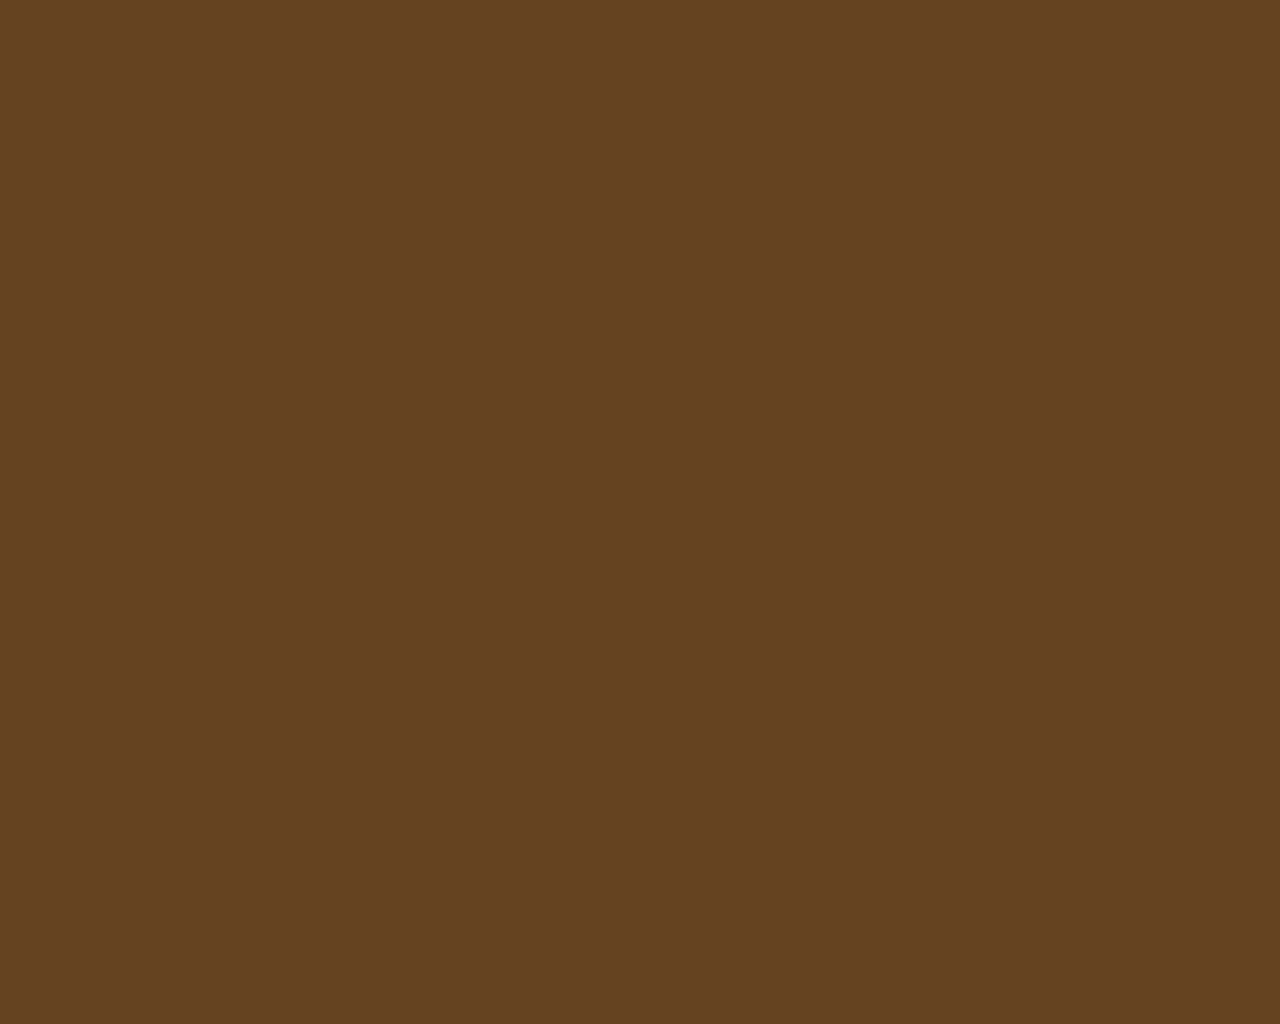 1280x1024 Otter Brown Solid Color Background